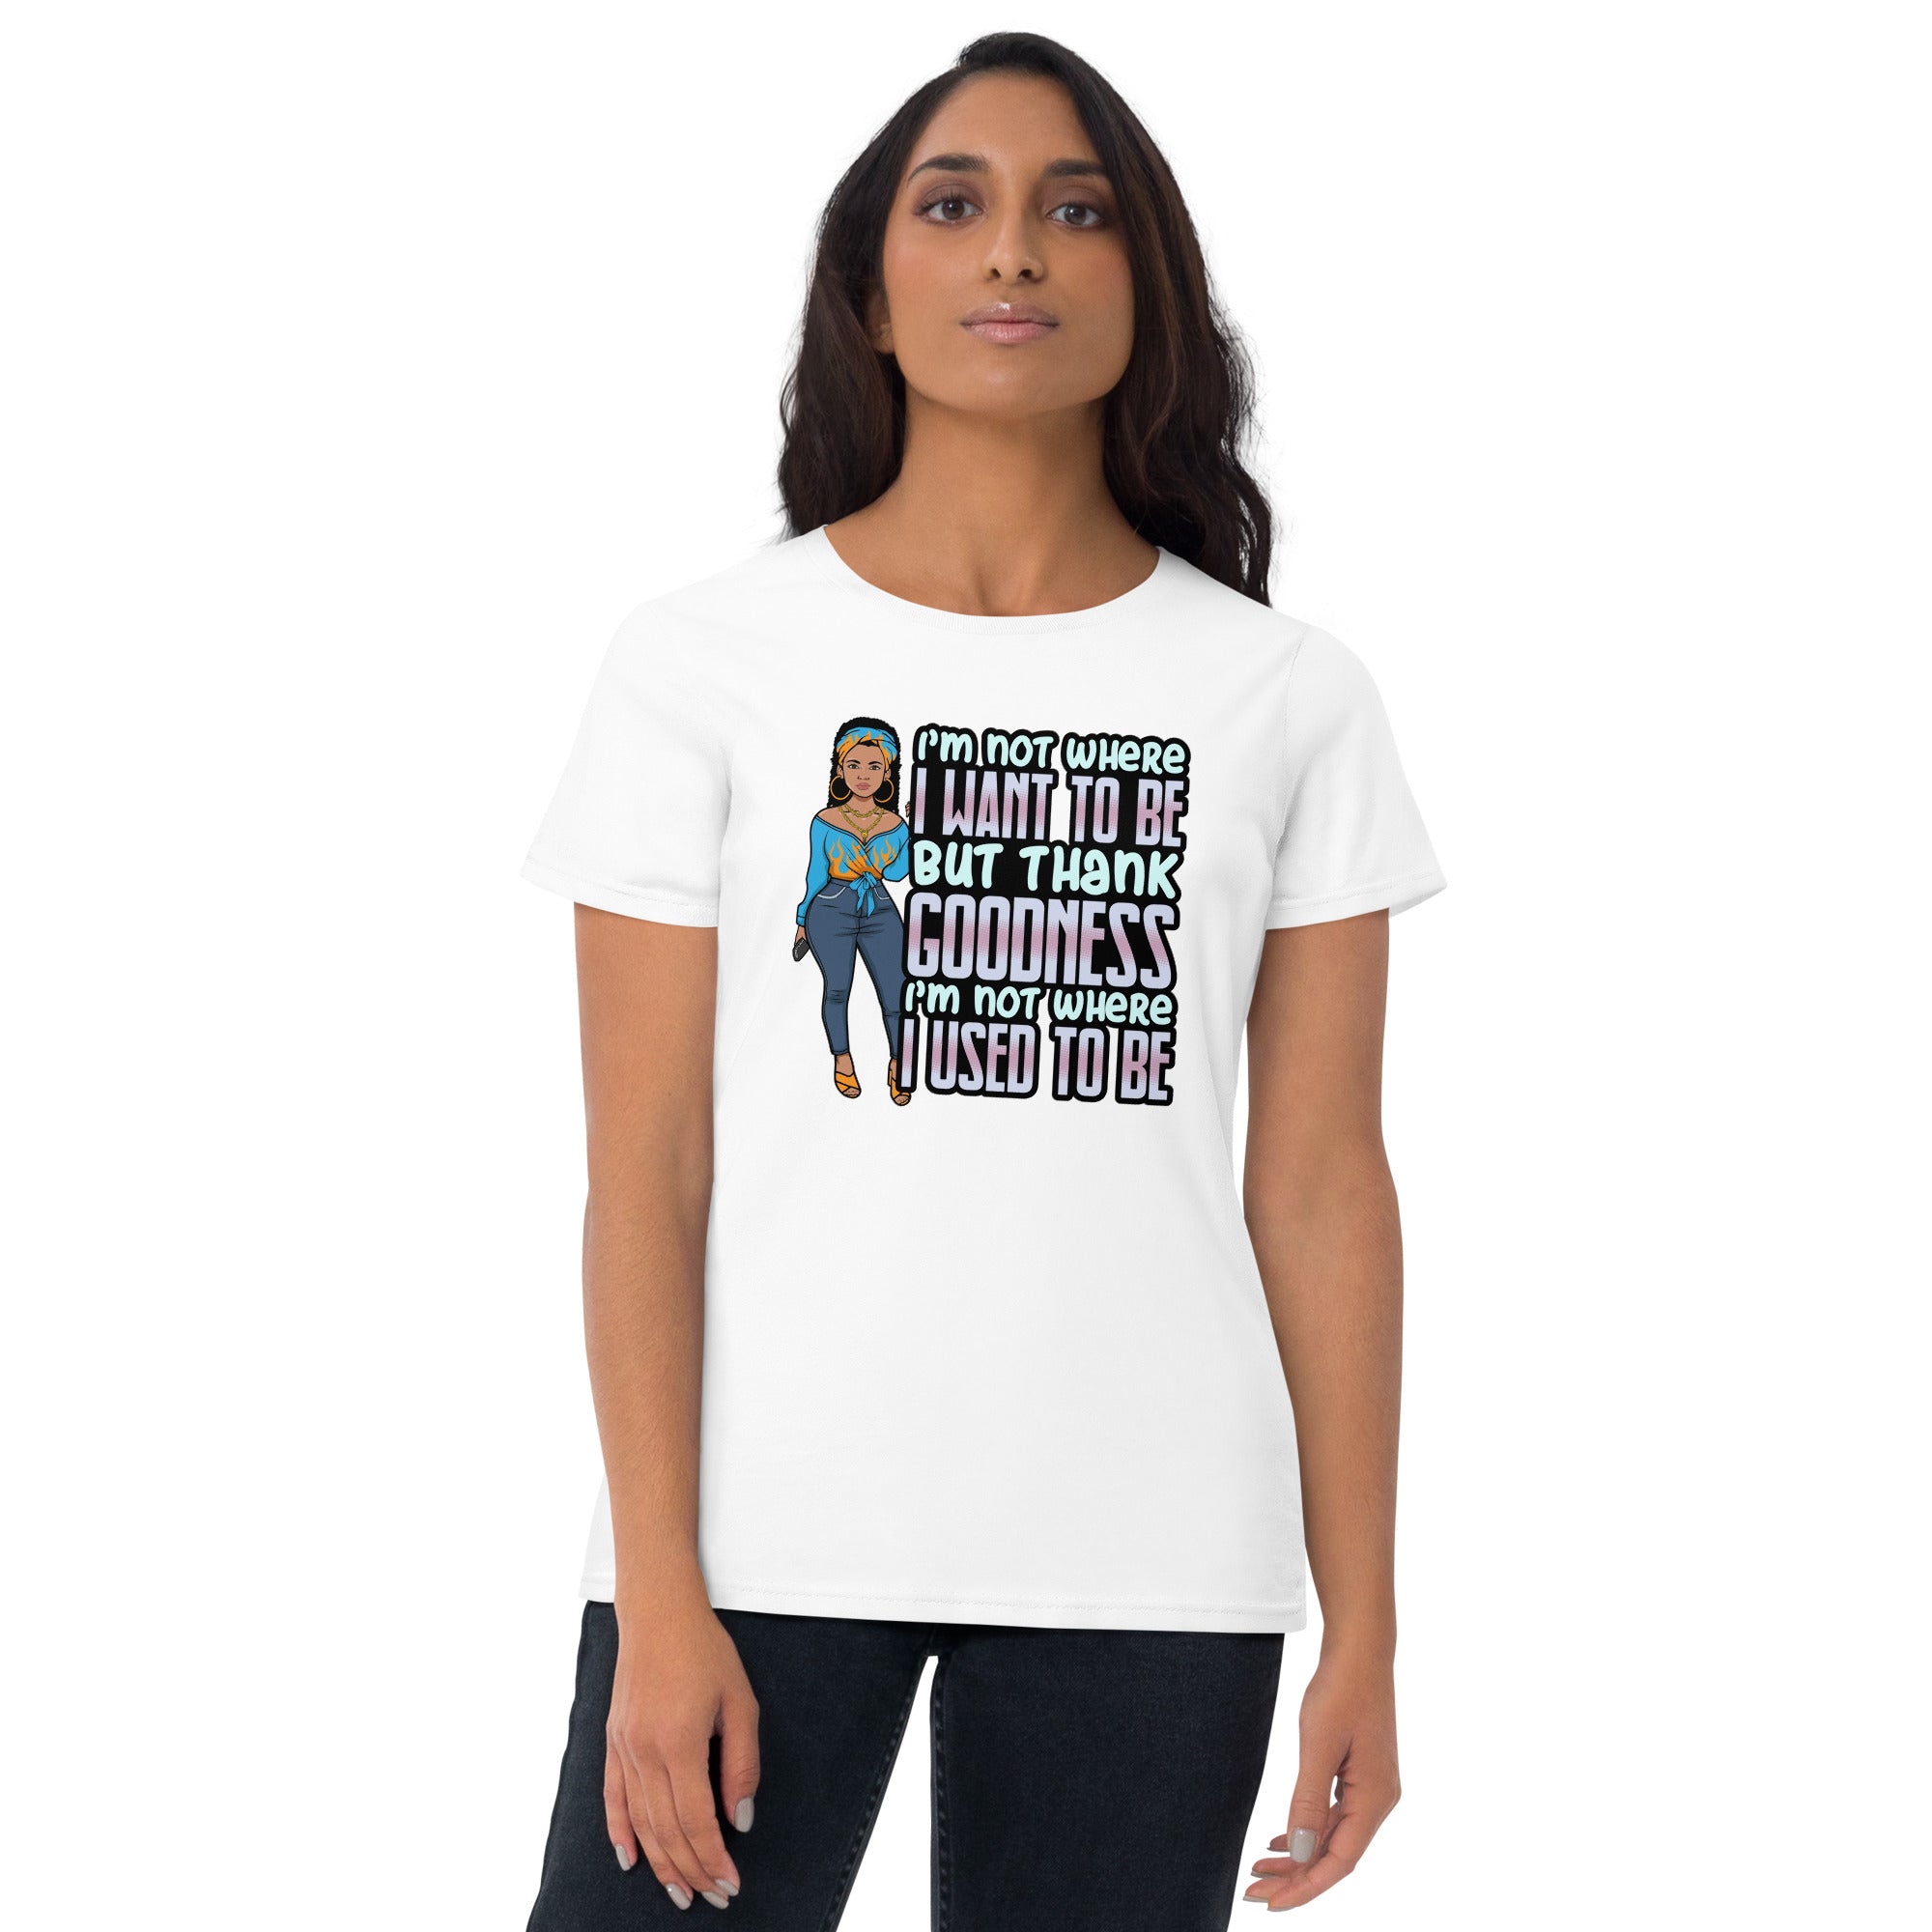 Women's I'M Not Where I Used to Be T-shirt